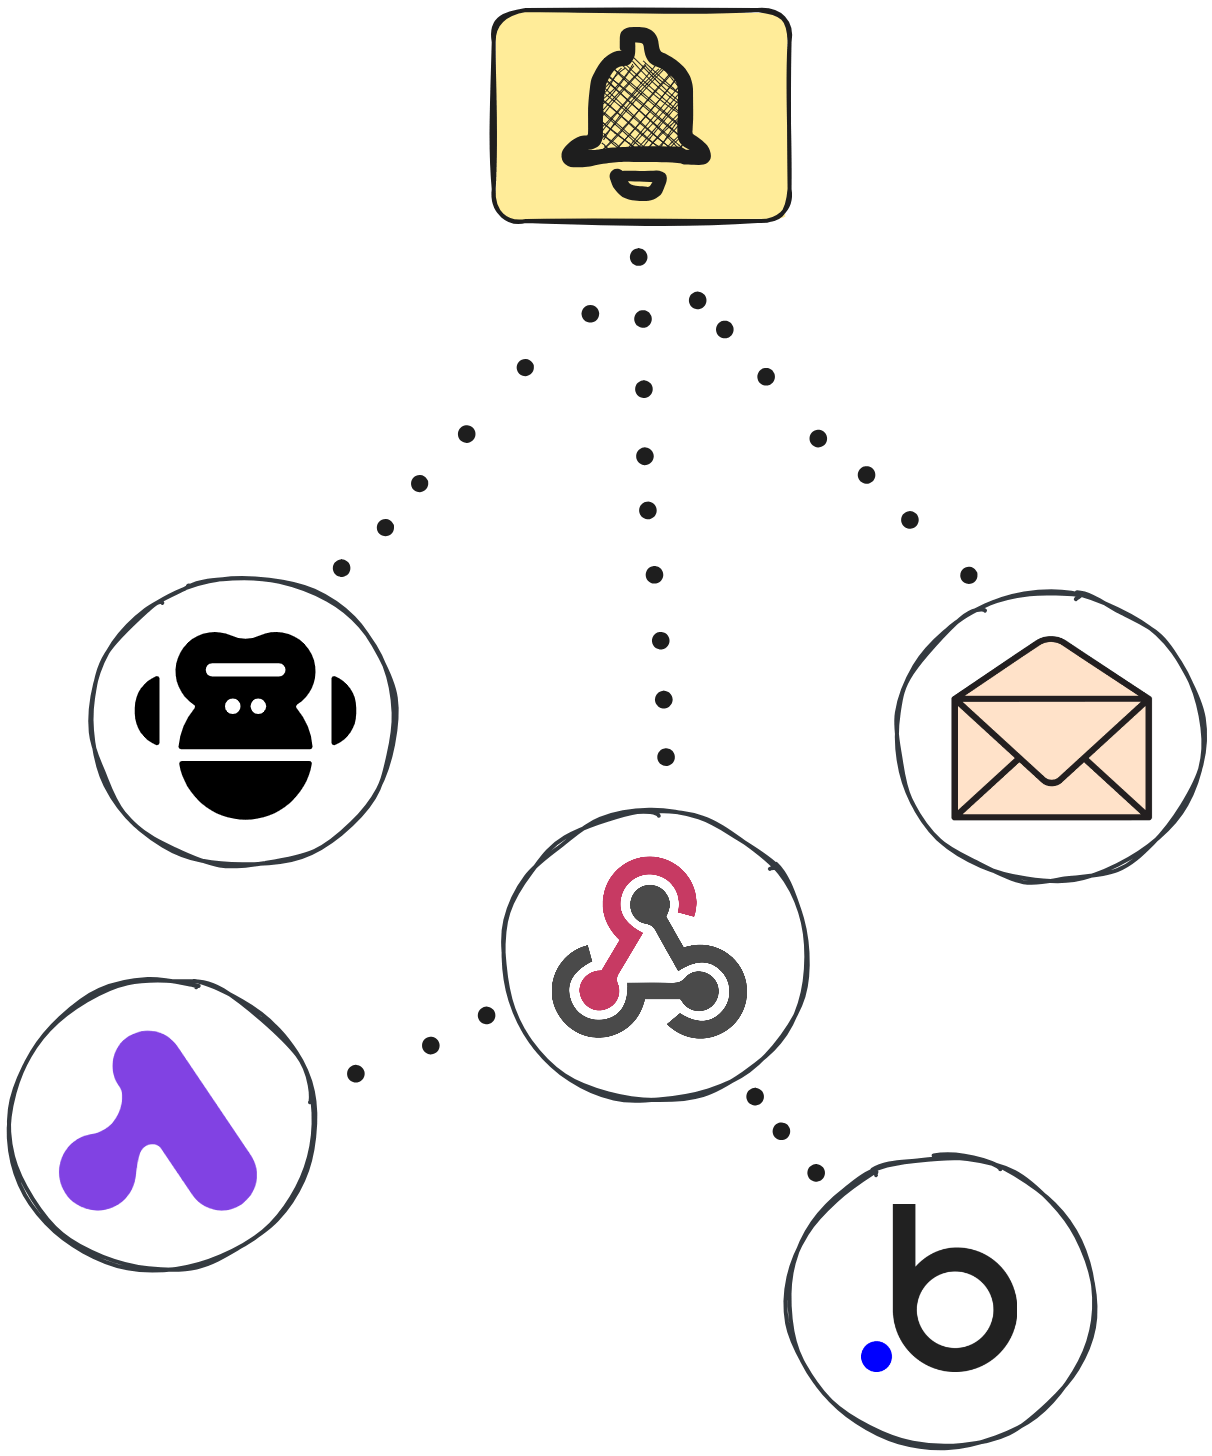 Illustration of SimplePDF integrations: webhooks, email, Robocorp, Activepieces...